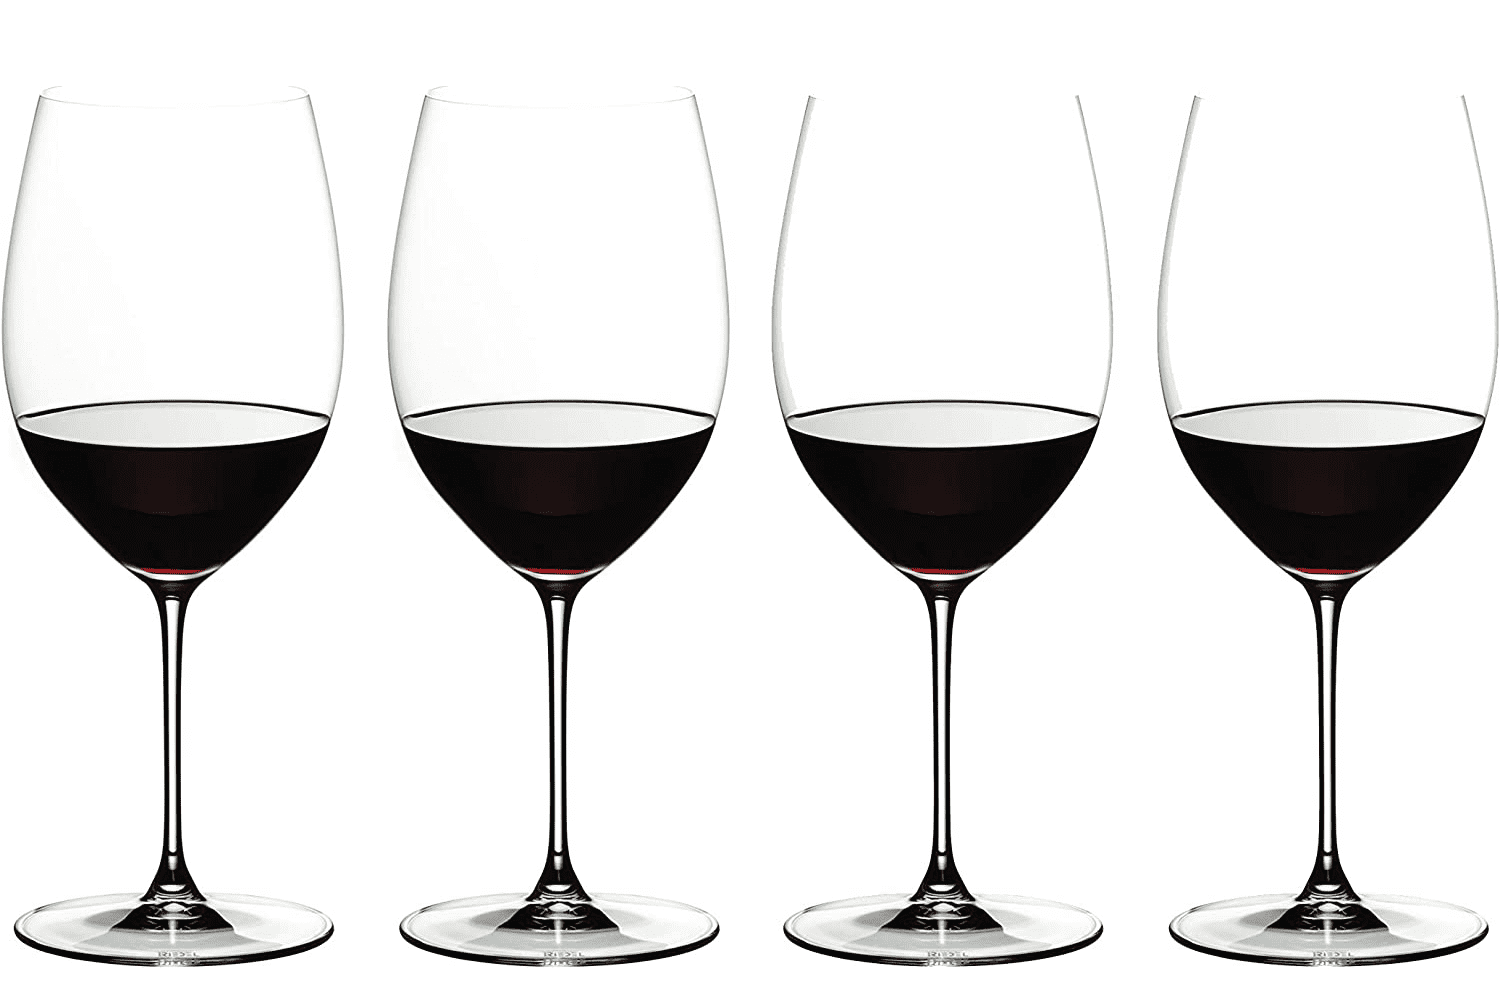 CANTONG Wine Glasses set of 4, Red Wine Glasses, Unbreakable Wine Glasses